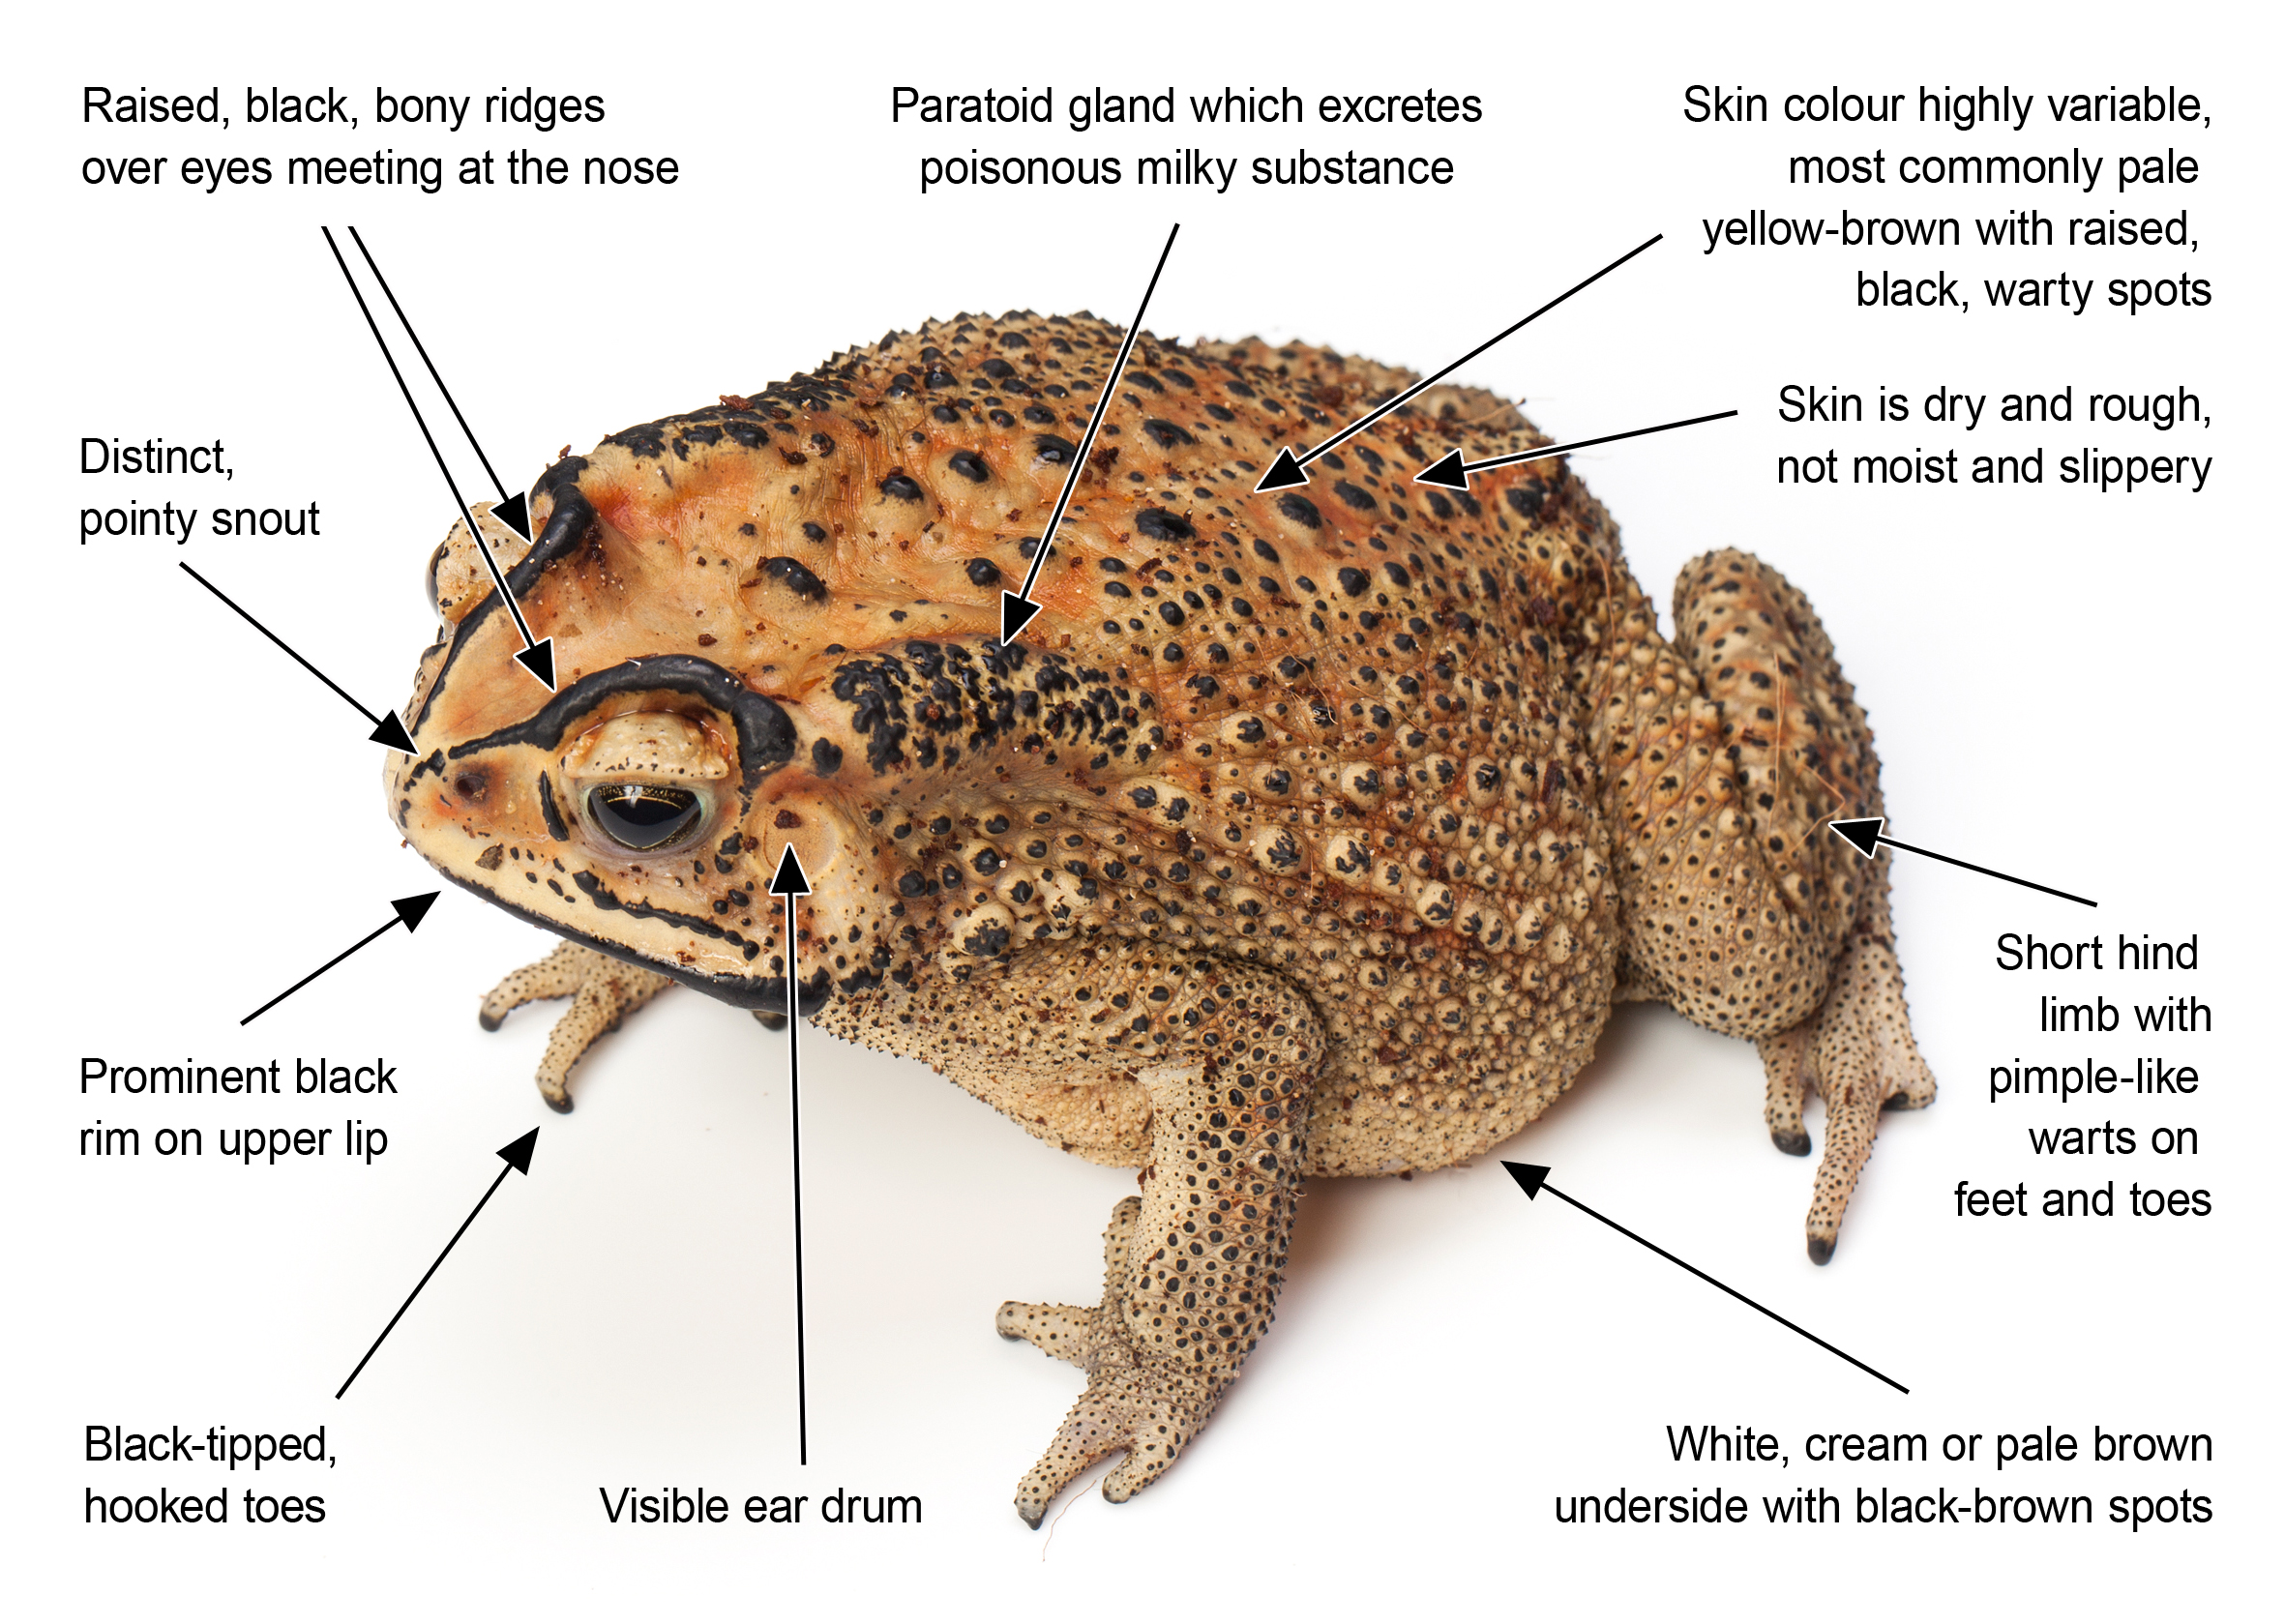 Diagram showing characteristics of the Asian black-spined toad as described in the text to follow